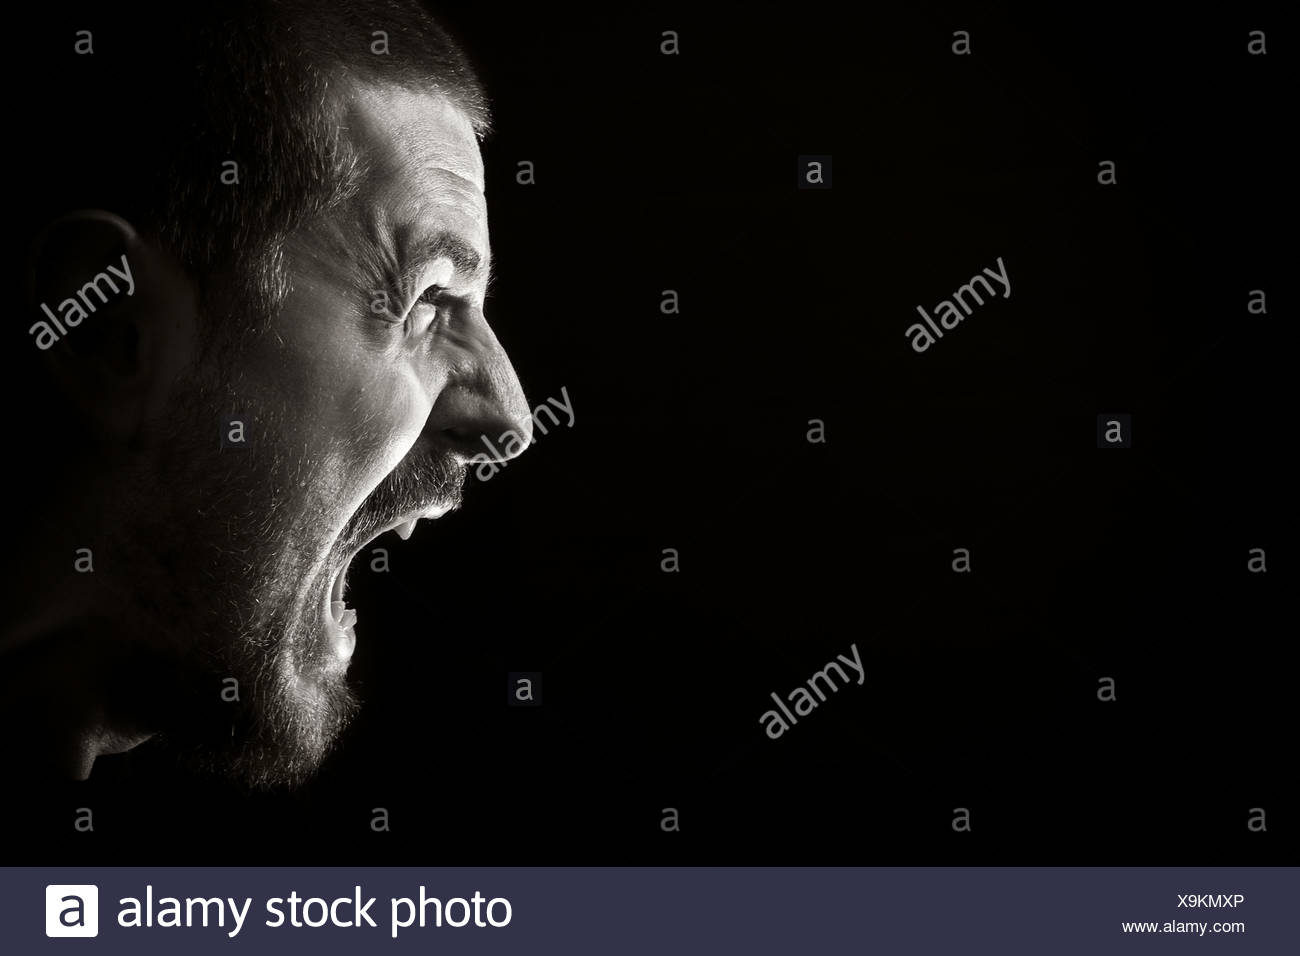 Portrait of screaming angry man on black background Stock Photo